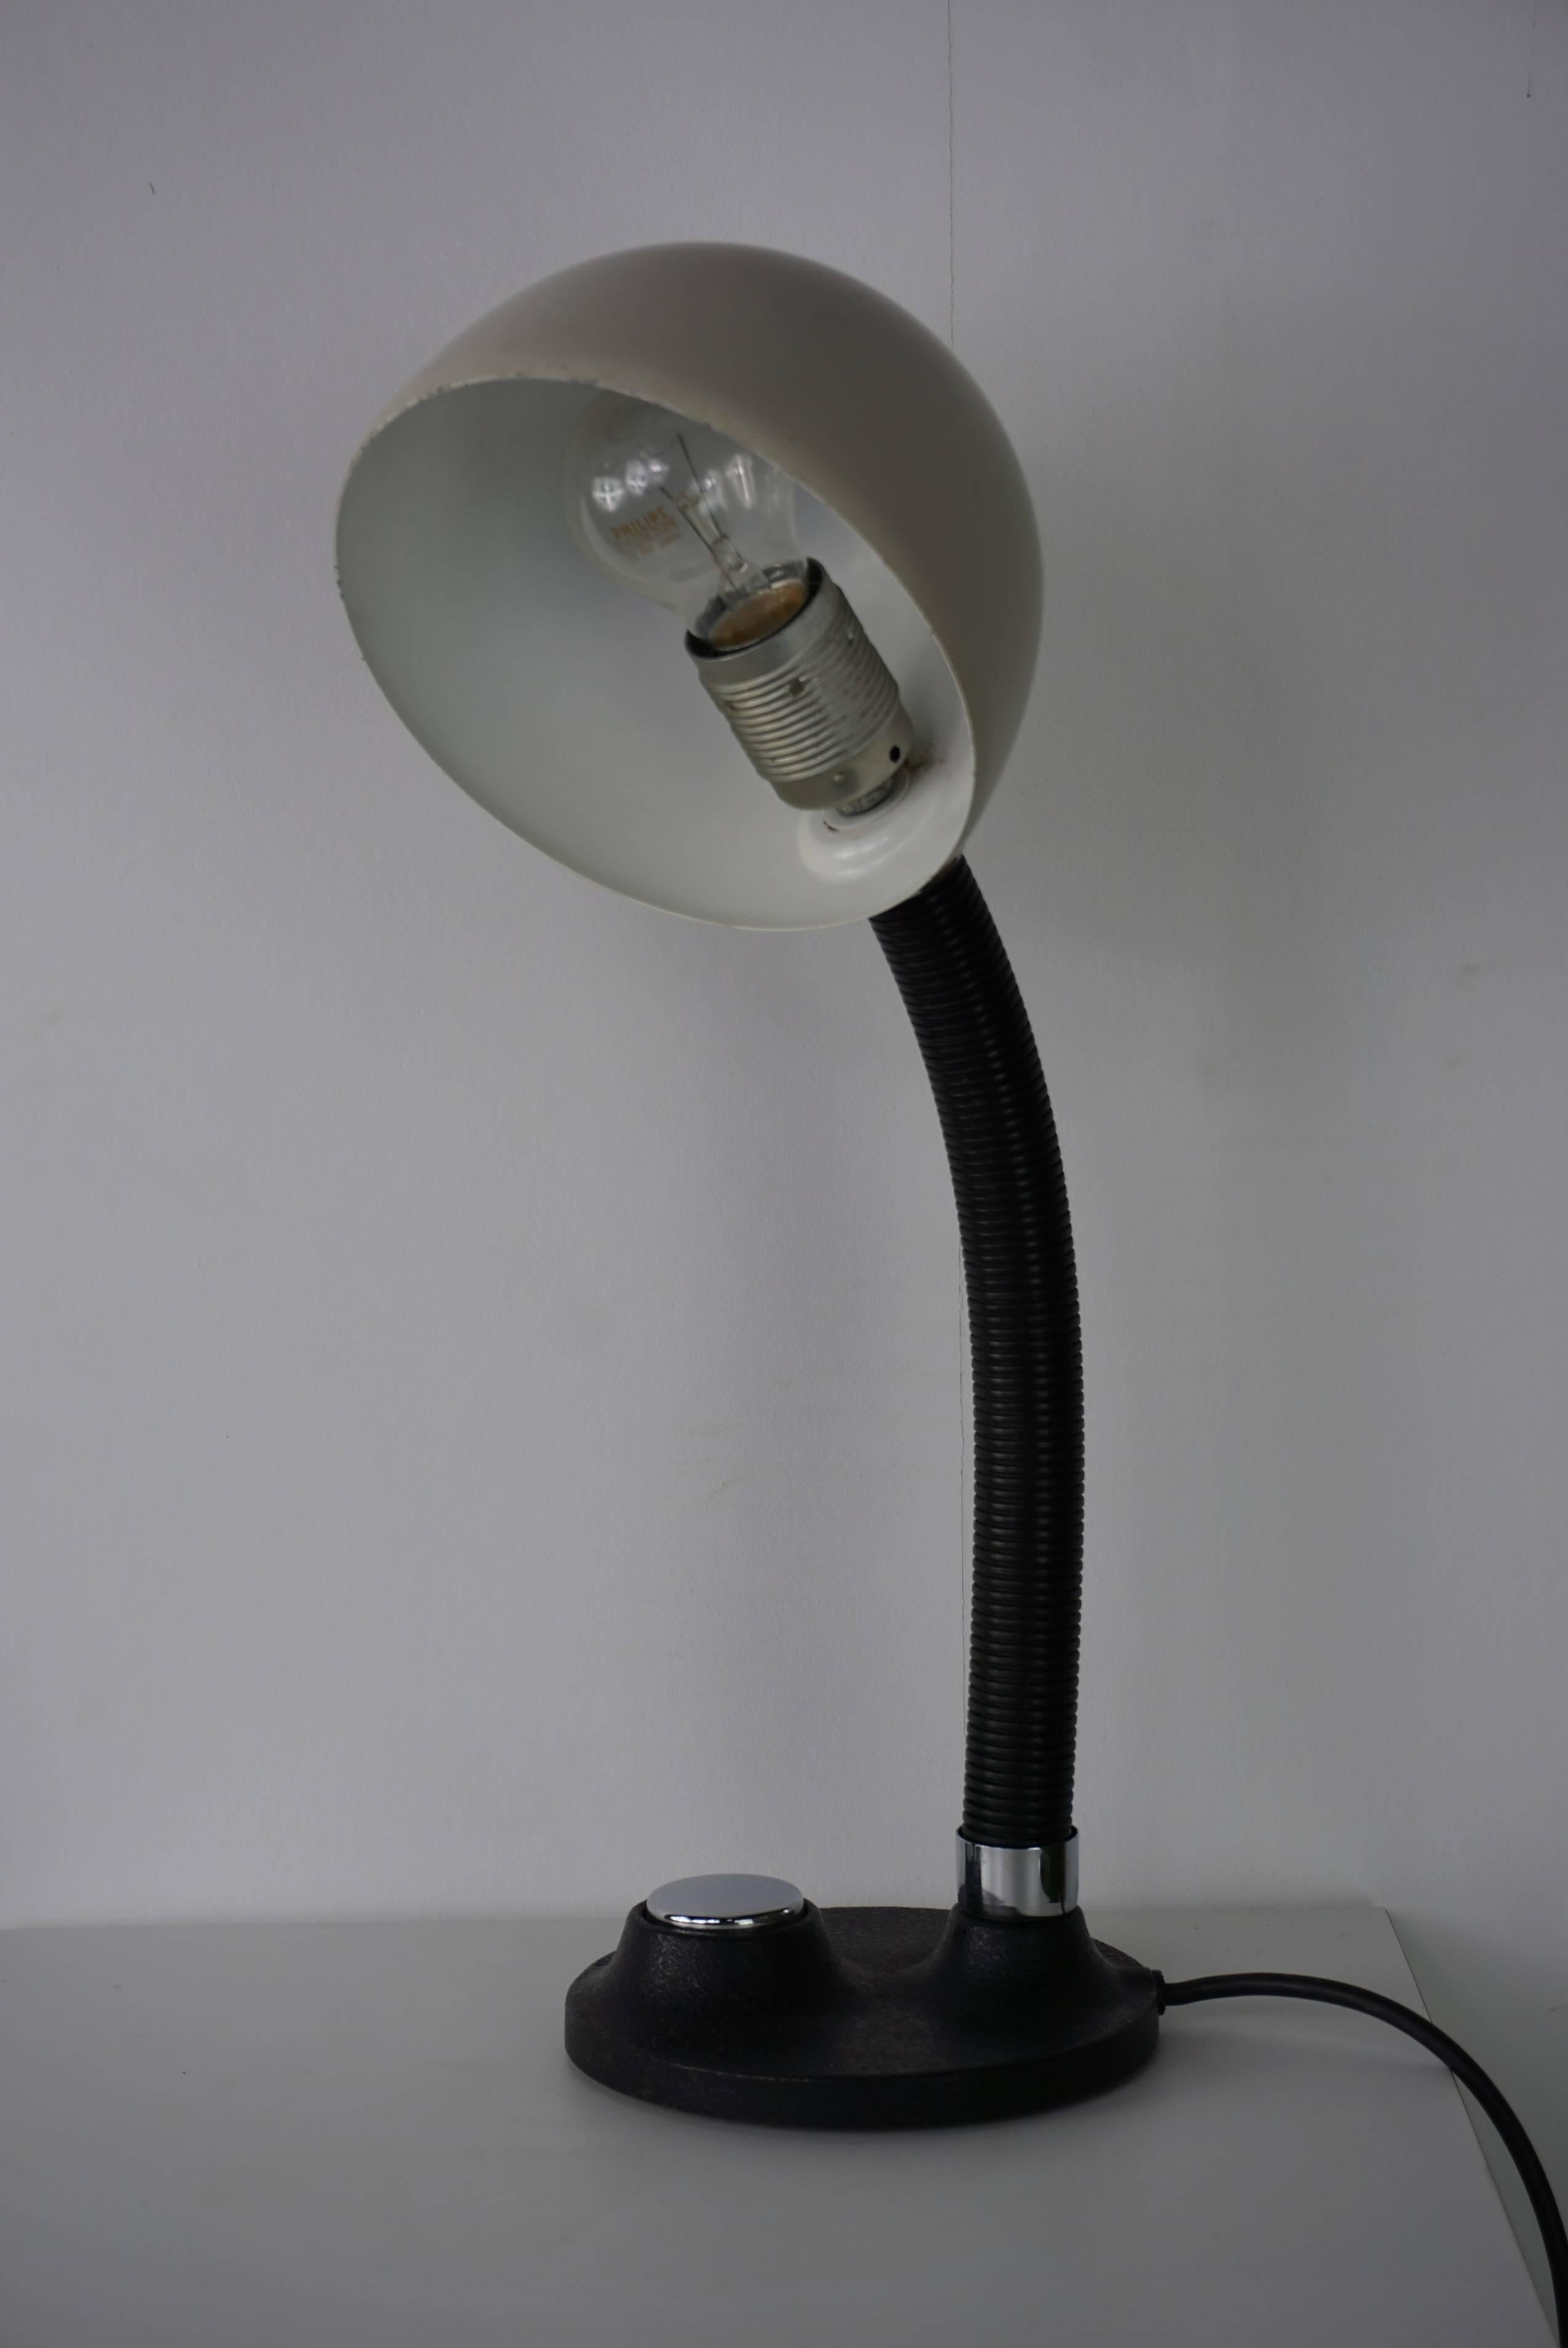 Vintage and industrial look for this desk lamp with its cast iron foot, flexible and articulated arm to finish this work with a metal shade. All rounded, this lamp design by Egon Hillebrand is in perfect condition!